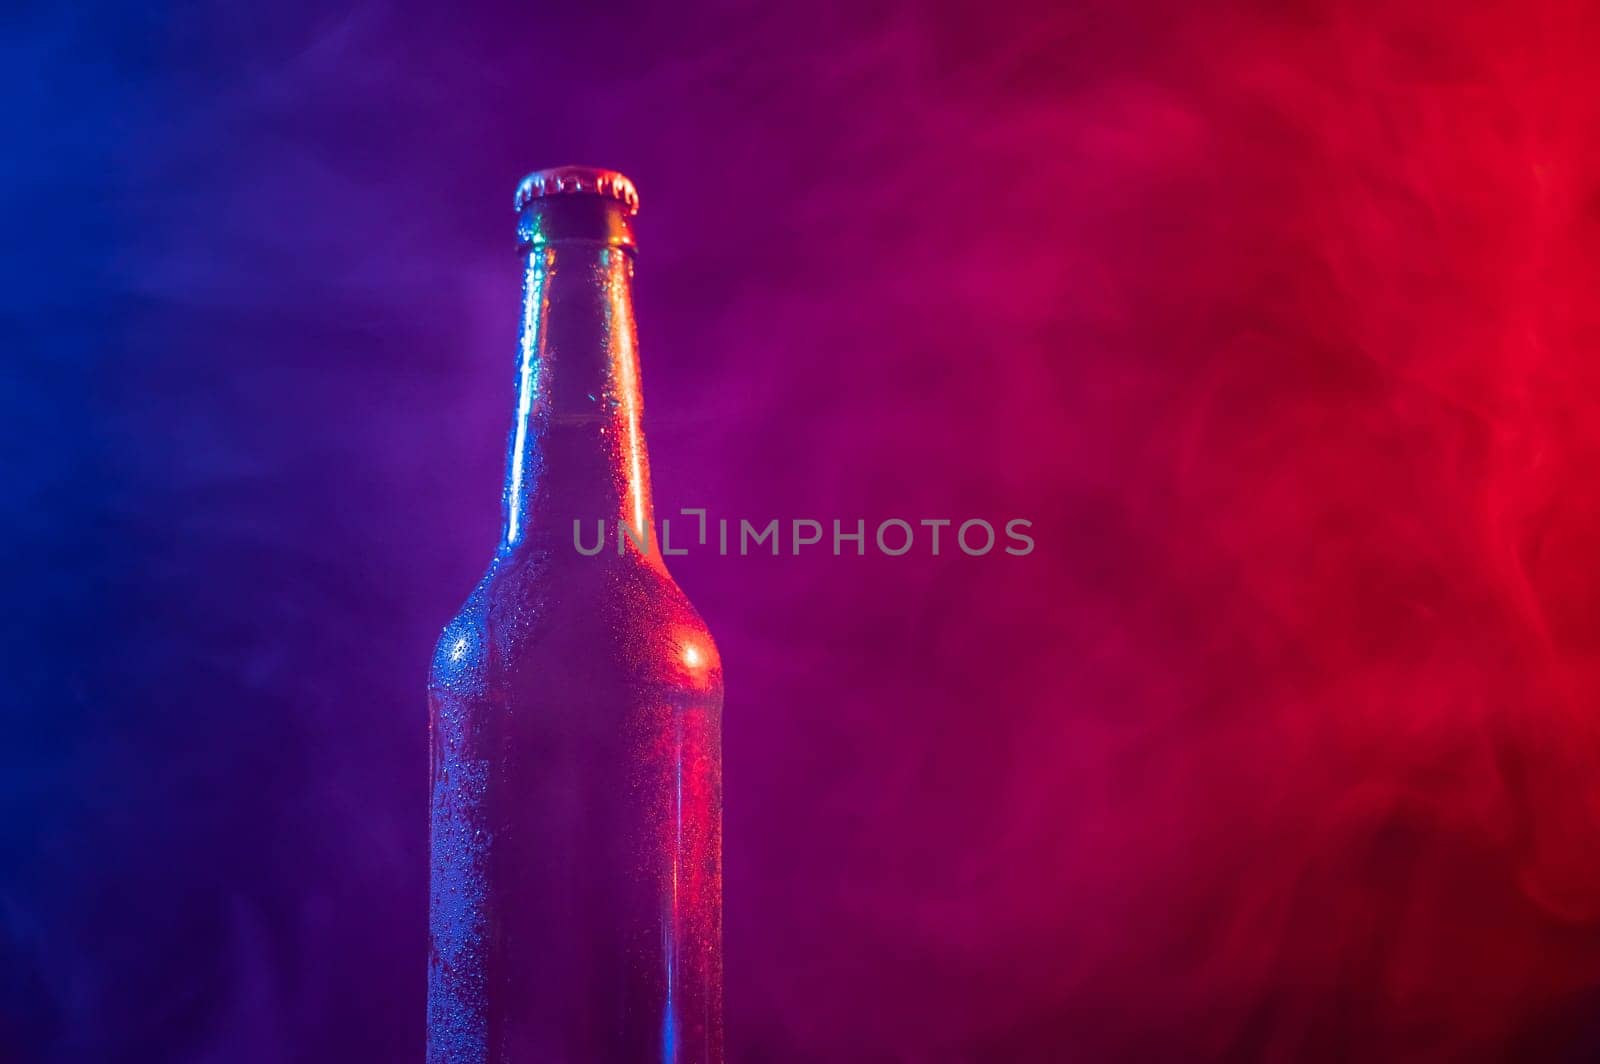 Glass bottle of beer in blue pink mist by mrwed54